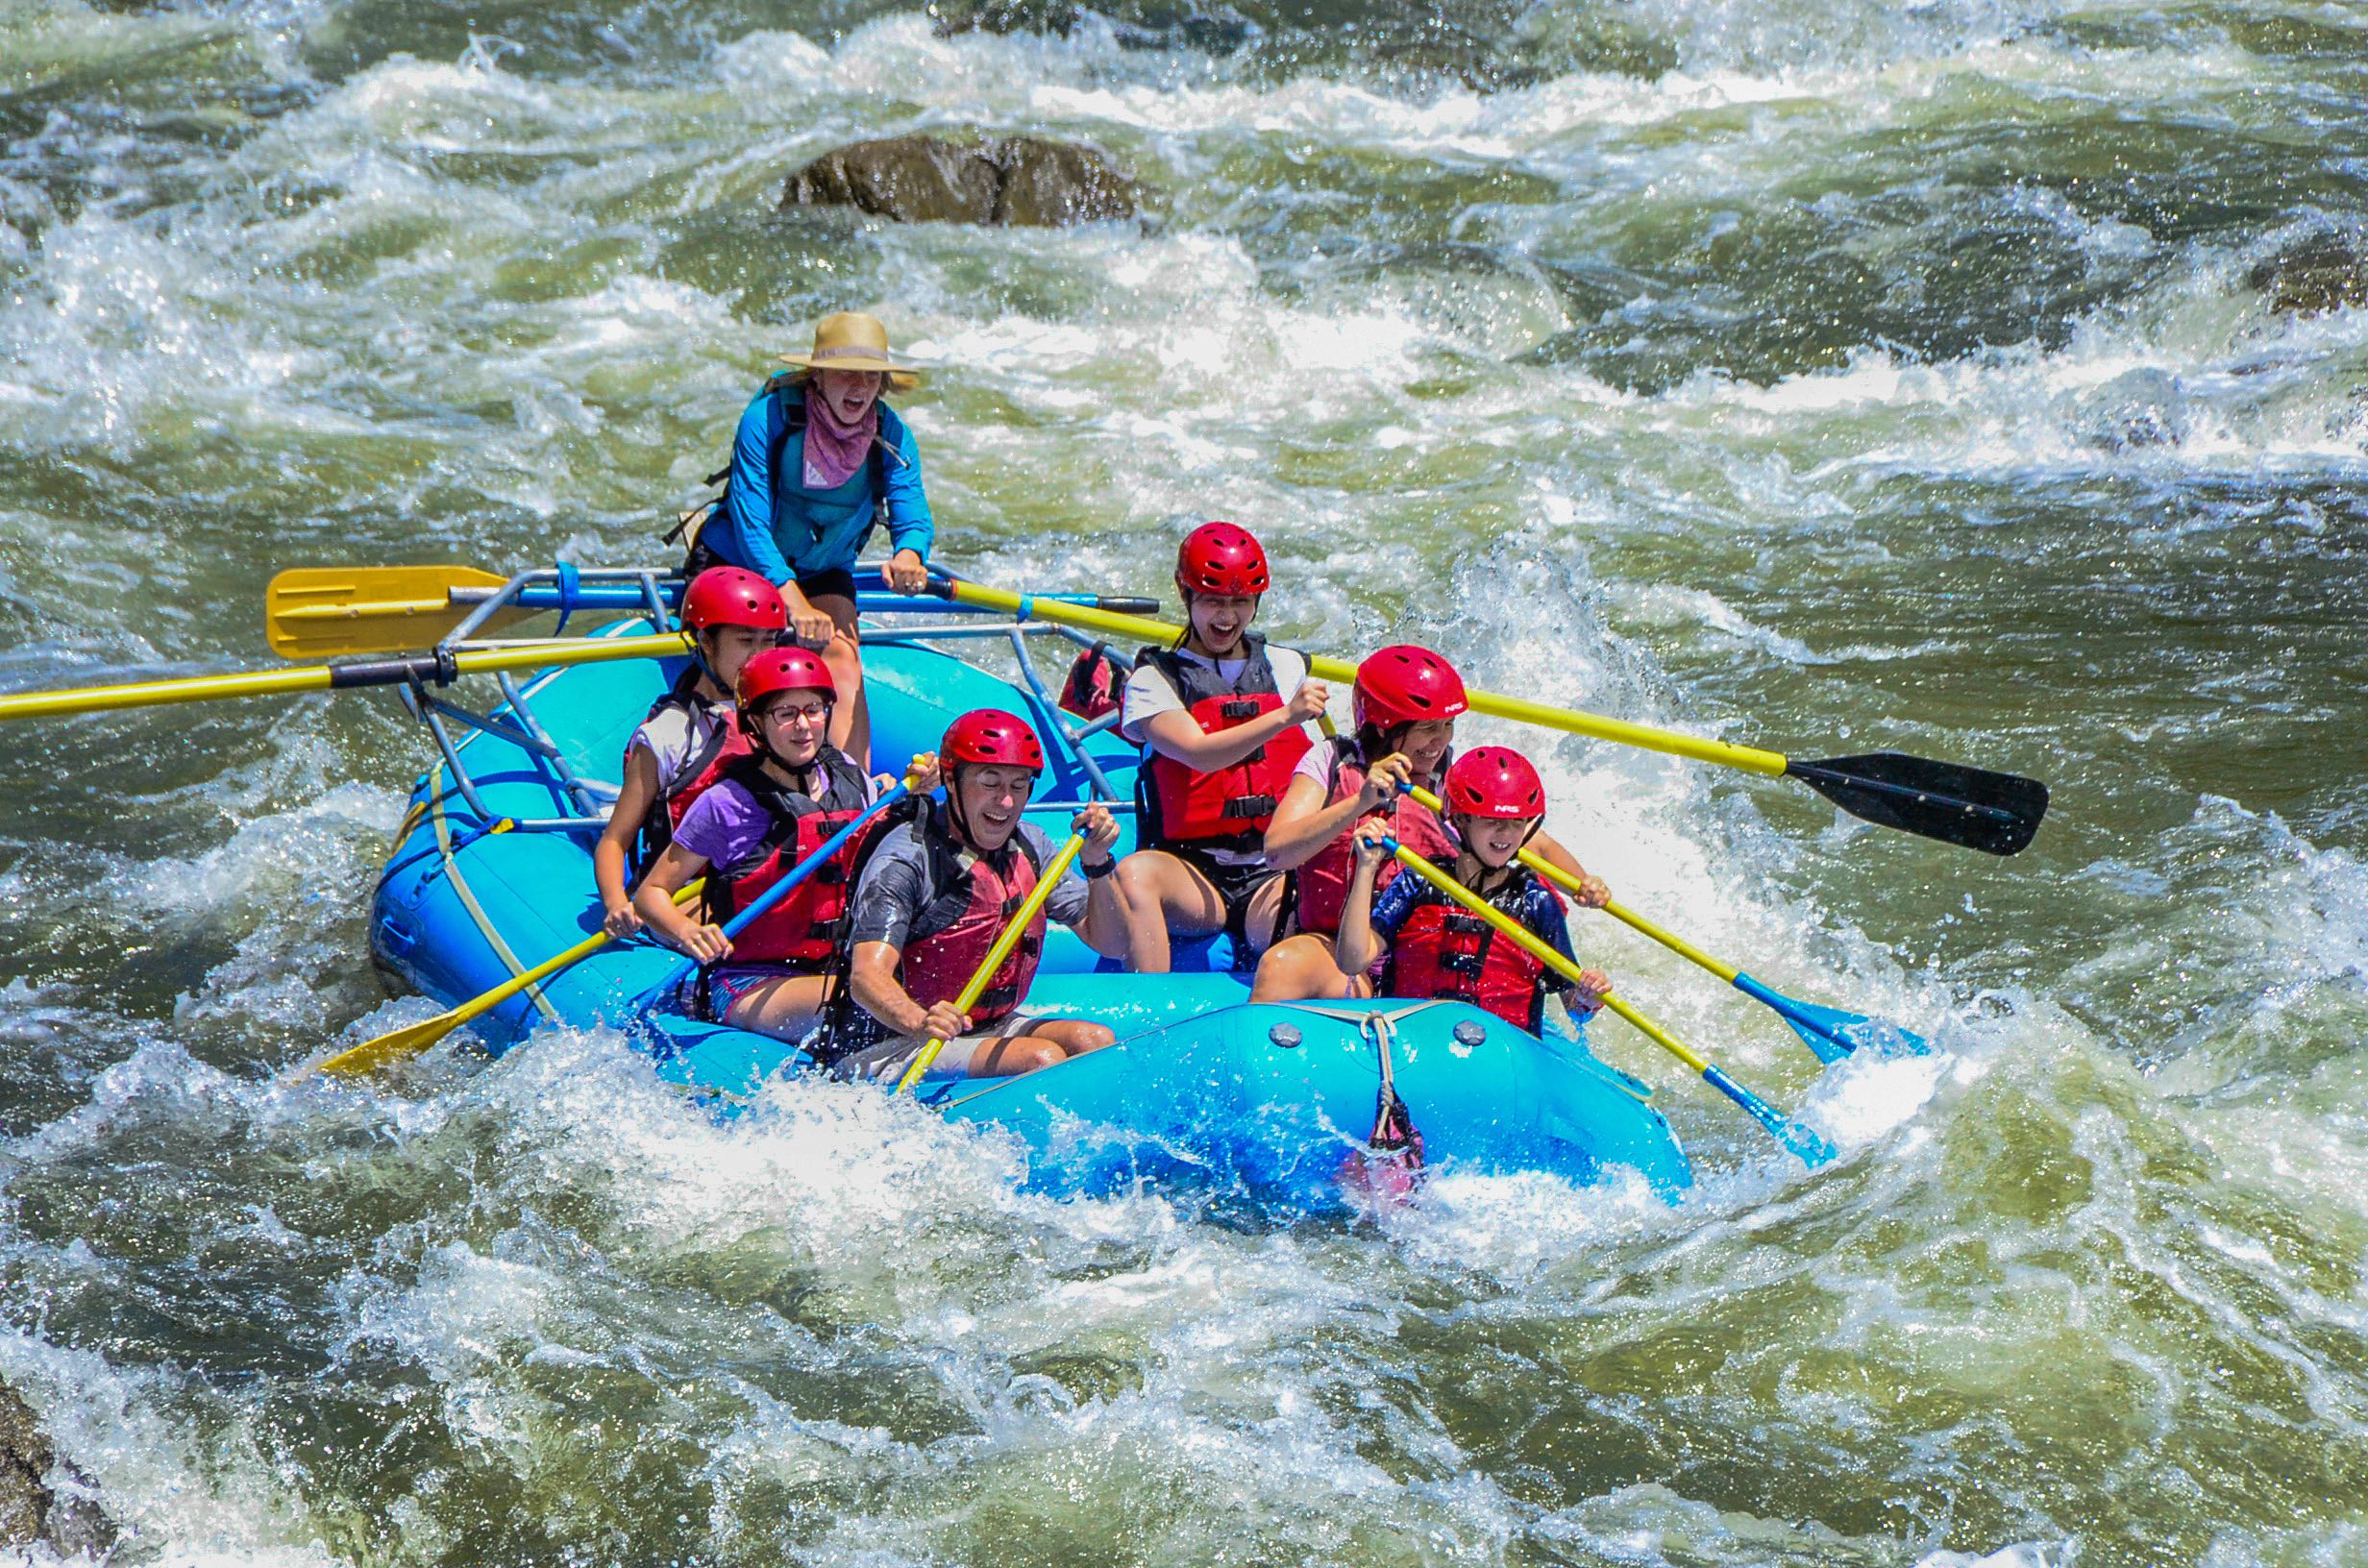 This is an action photo of a group of people and their guide paddling through rapids on the Colorado River. They wear safety gear as they get splashed, wearing big smiles on their faces.